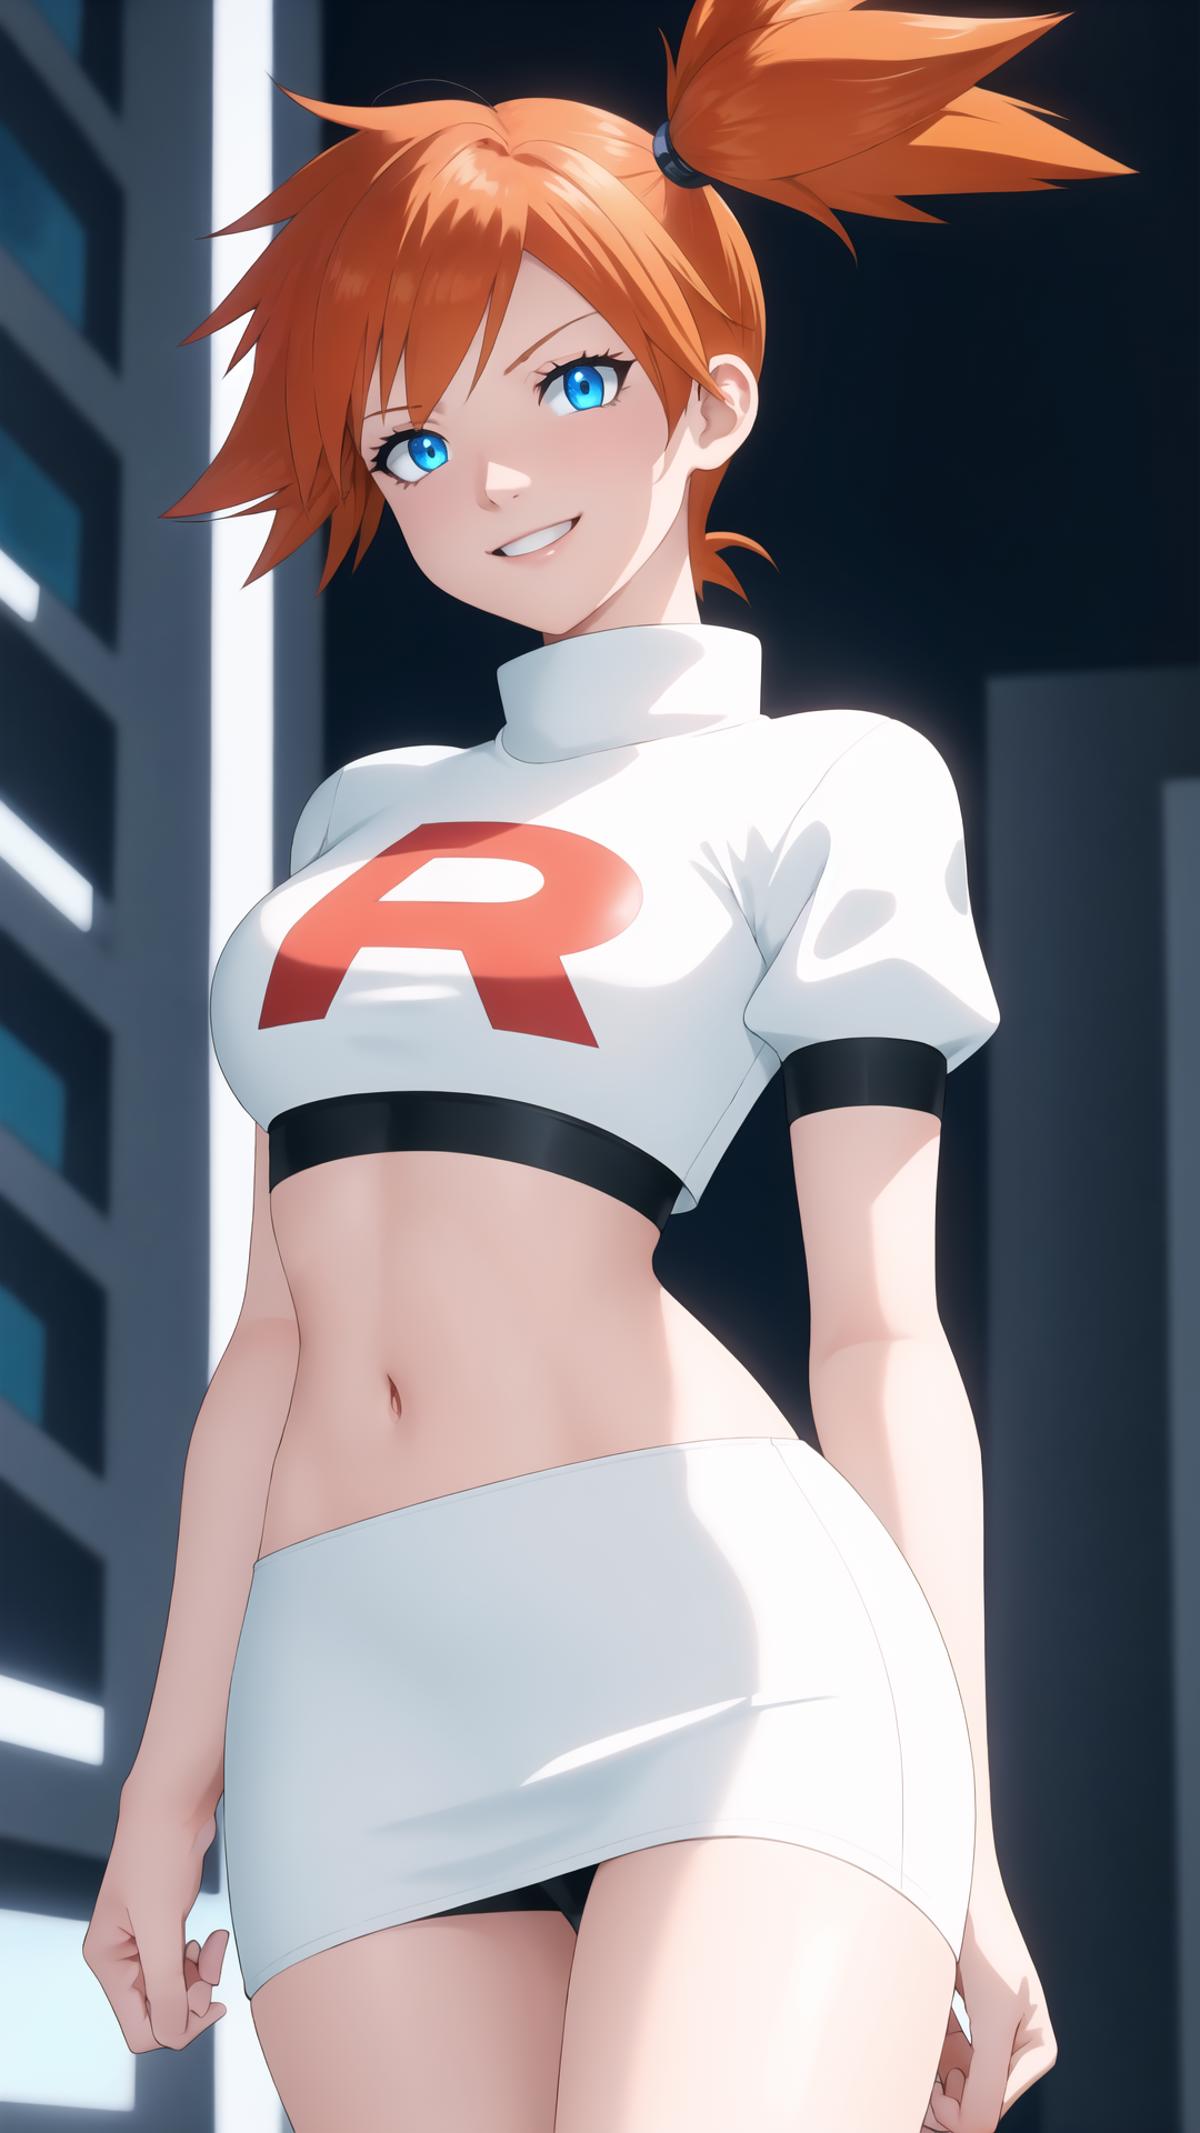 Anime-style female character wearing a white and red shirt.